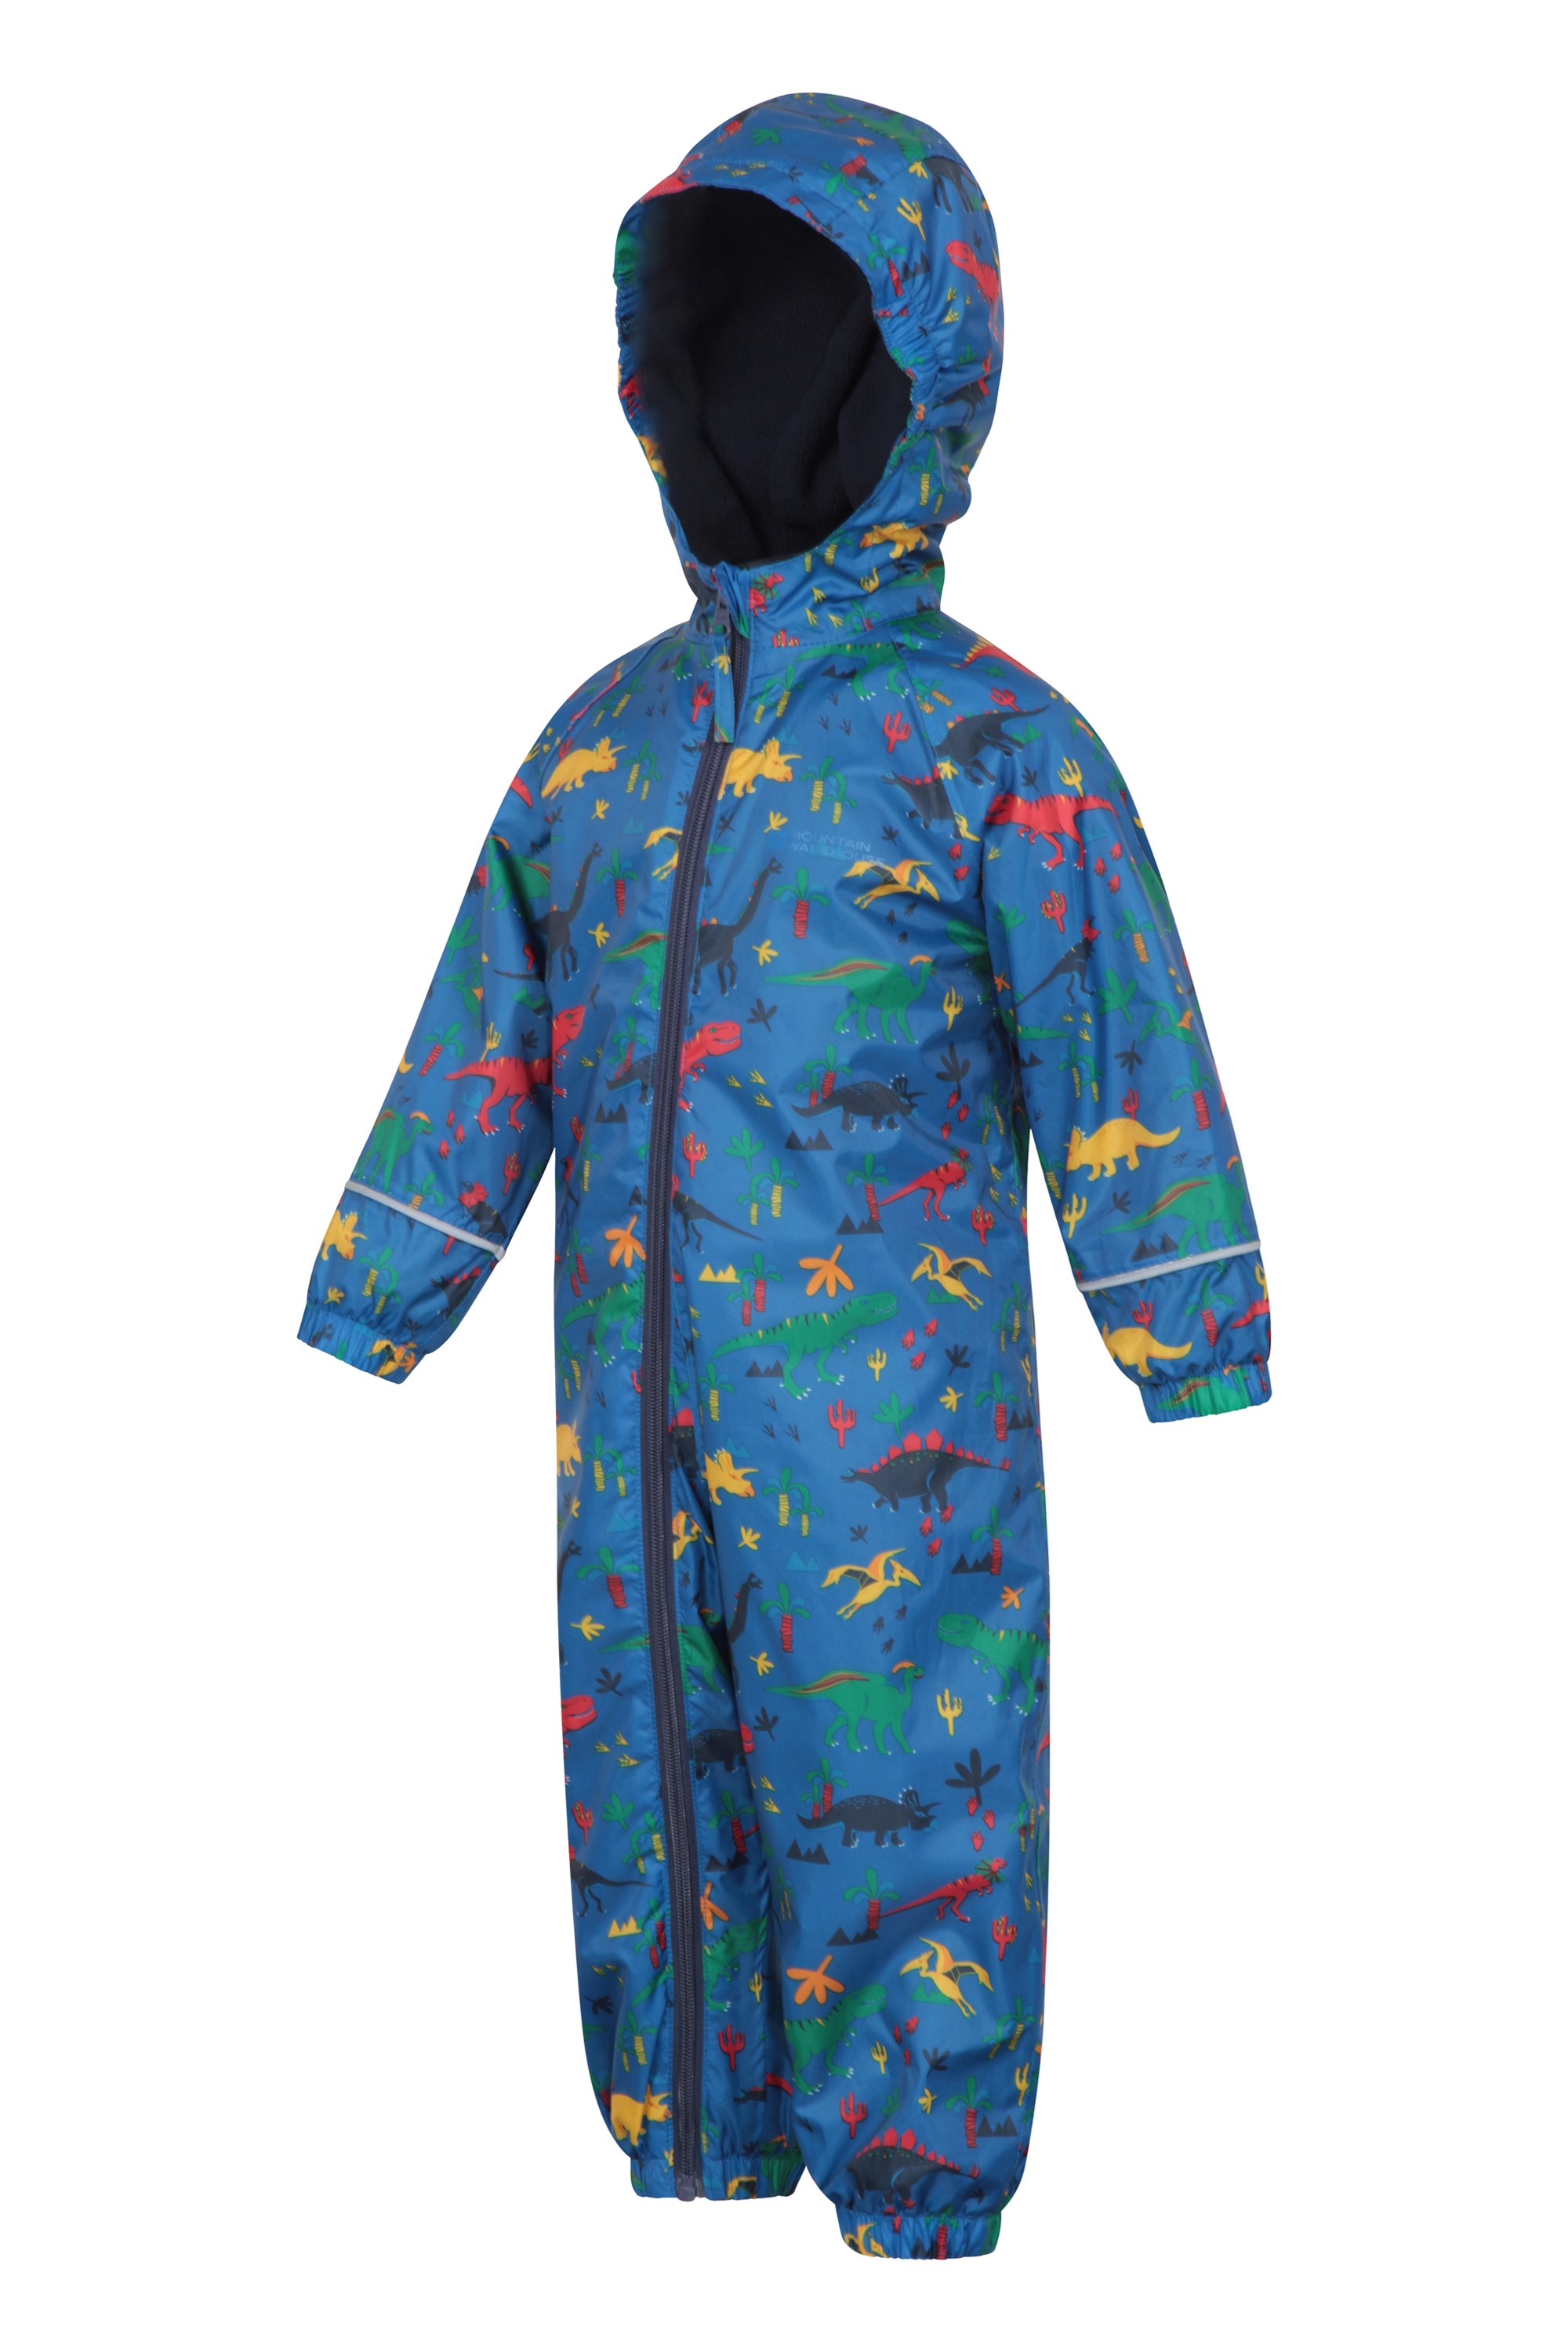 Taped Seams Kids Raincoat Breathable Suit Quick Dry Fleece Lined Waterproof Coat Mountain Warehouse Spright Printed Rain Suit for Travelling High Viz 